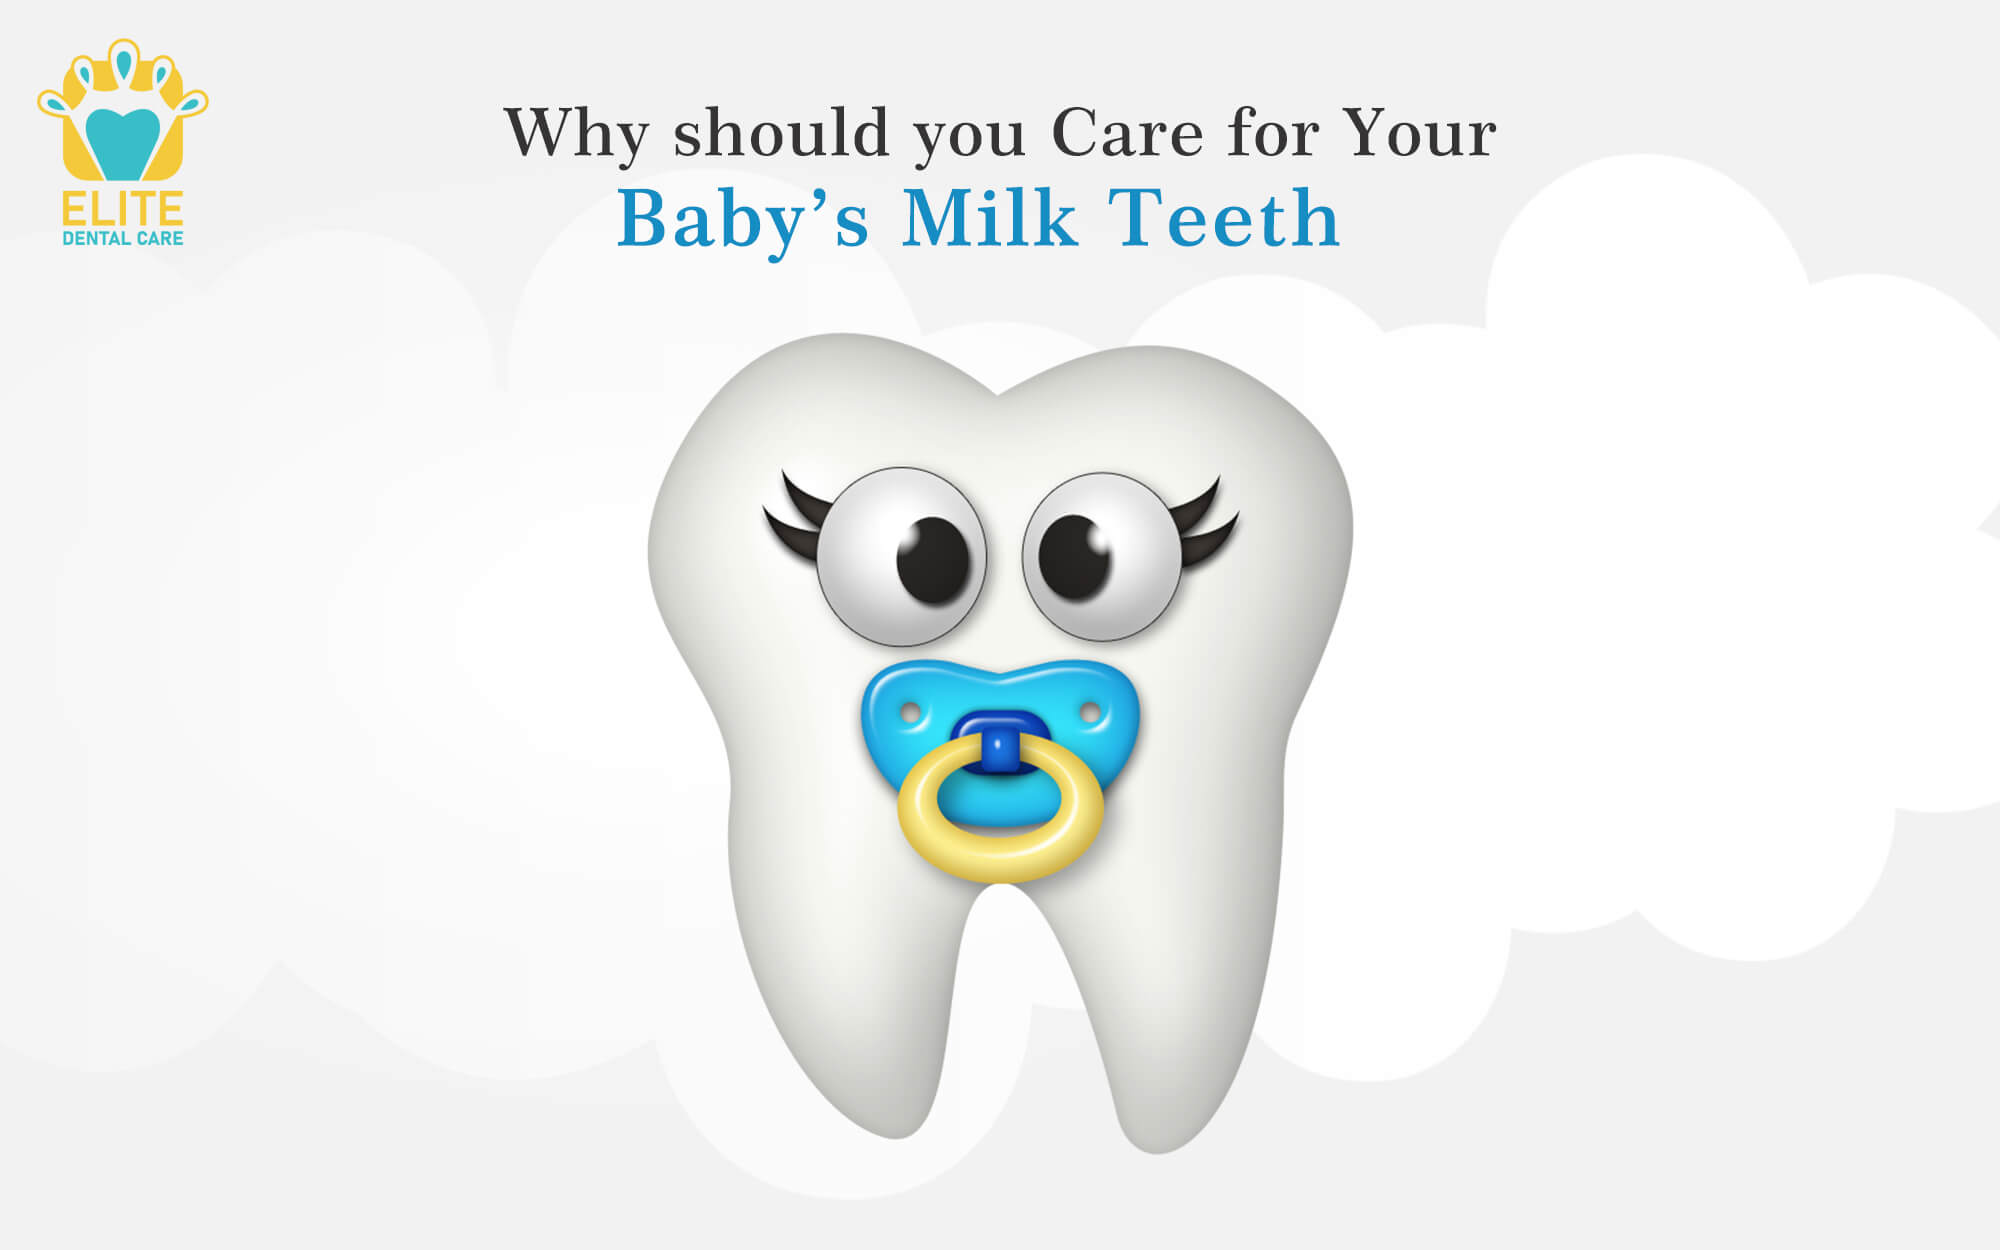 WHY SHOULD YOU CARE FOR YOUR BABY’S MILK TEETH?